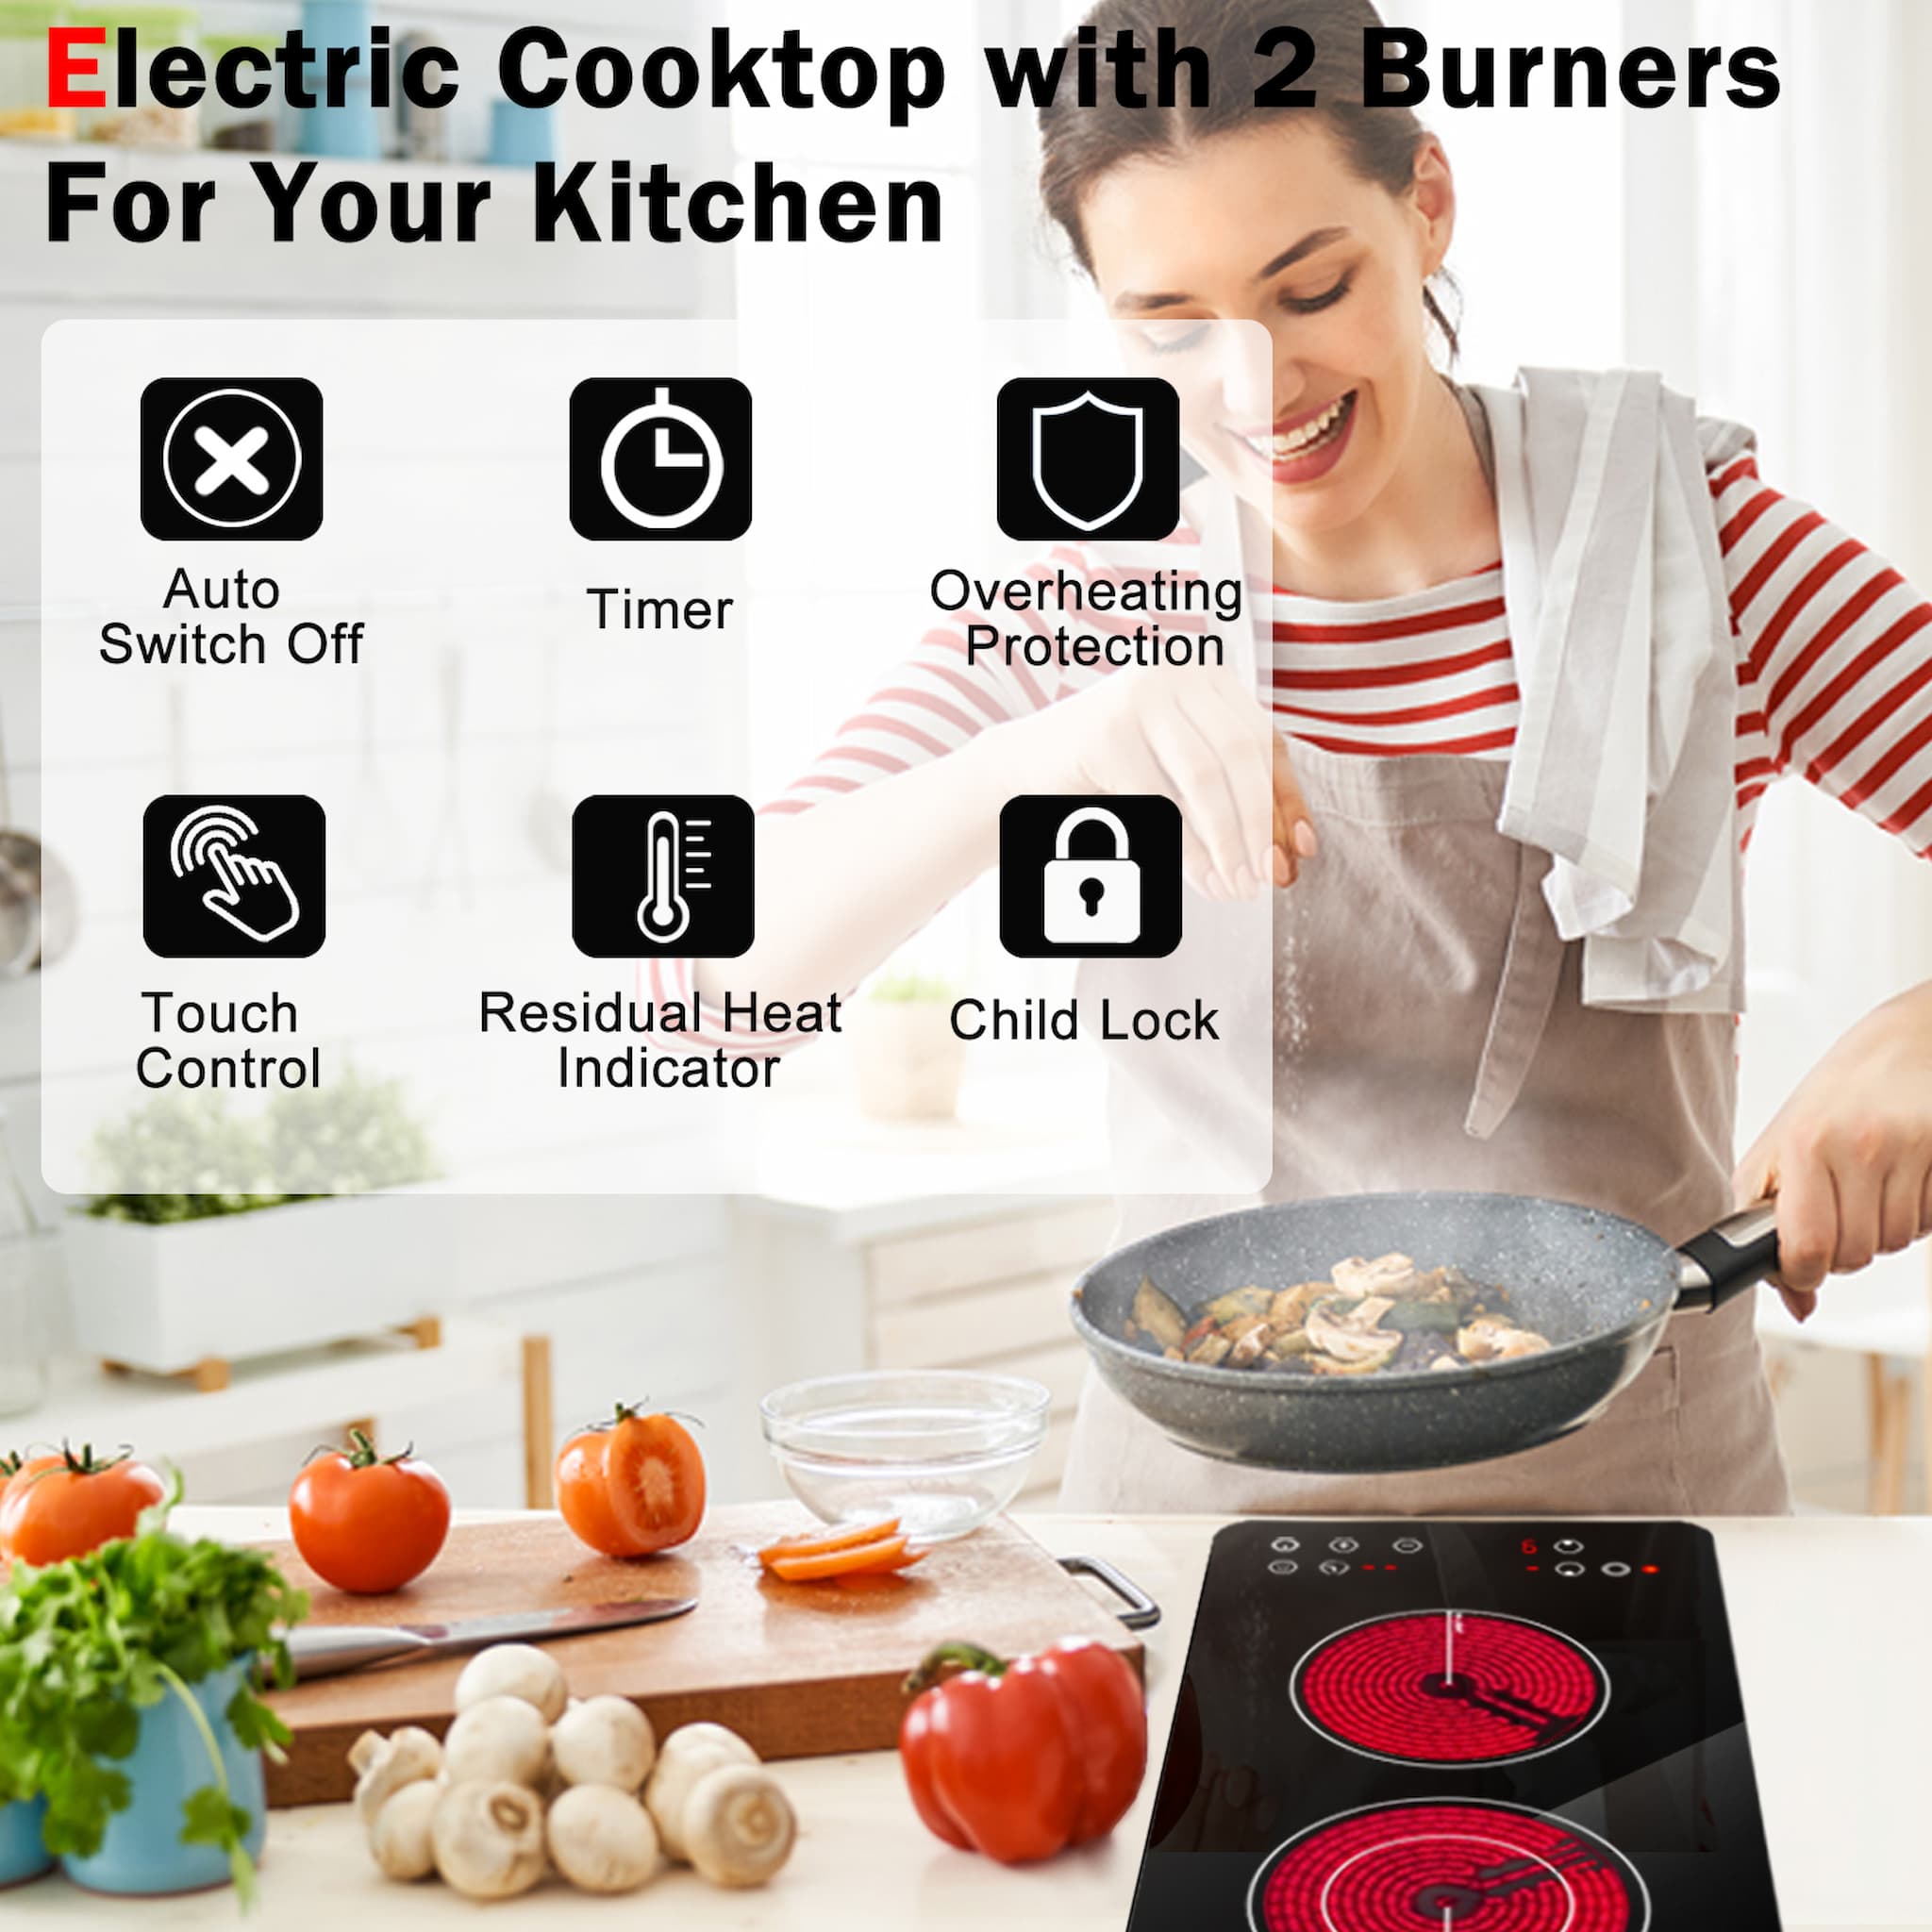 Karinear 2 Burner Electric Cooktop 12 Inch, Drop-in Electric Radiant Cooktop 220v - 240v with Child Safety Lock, Timer, Residual Heat Indicator, 3200W, Hard Wired, No Plug Electric Stove Top